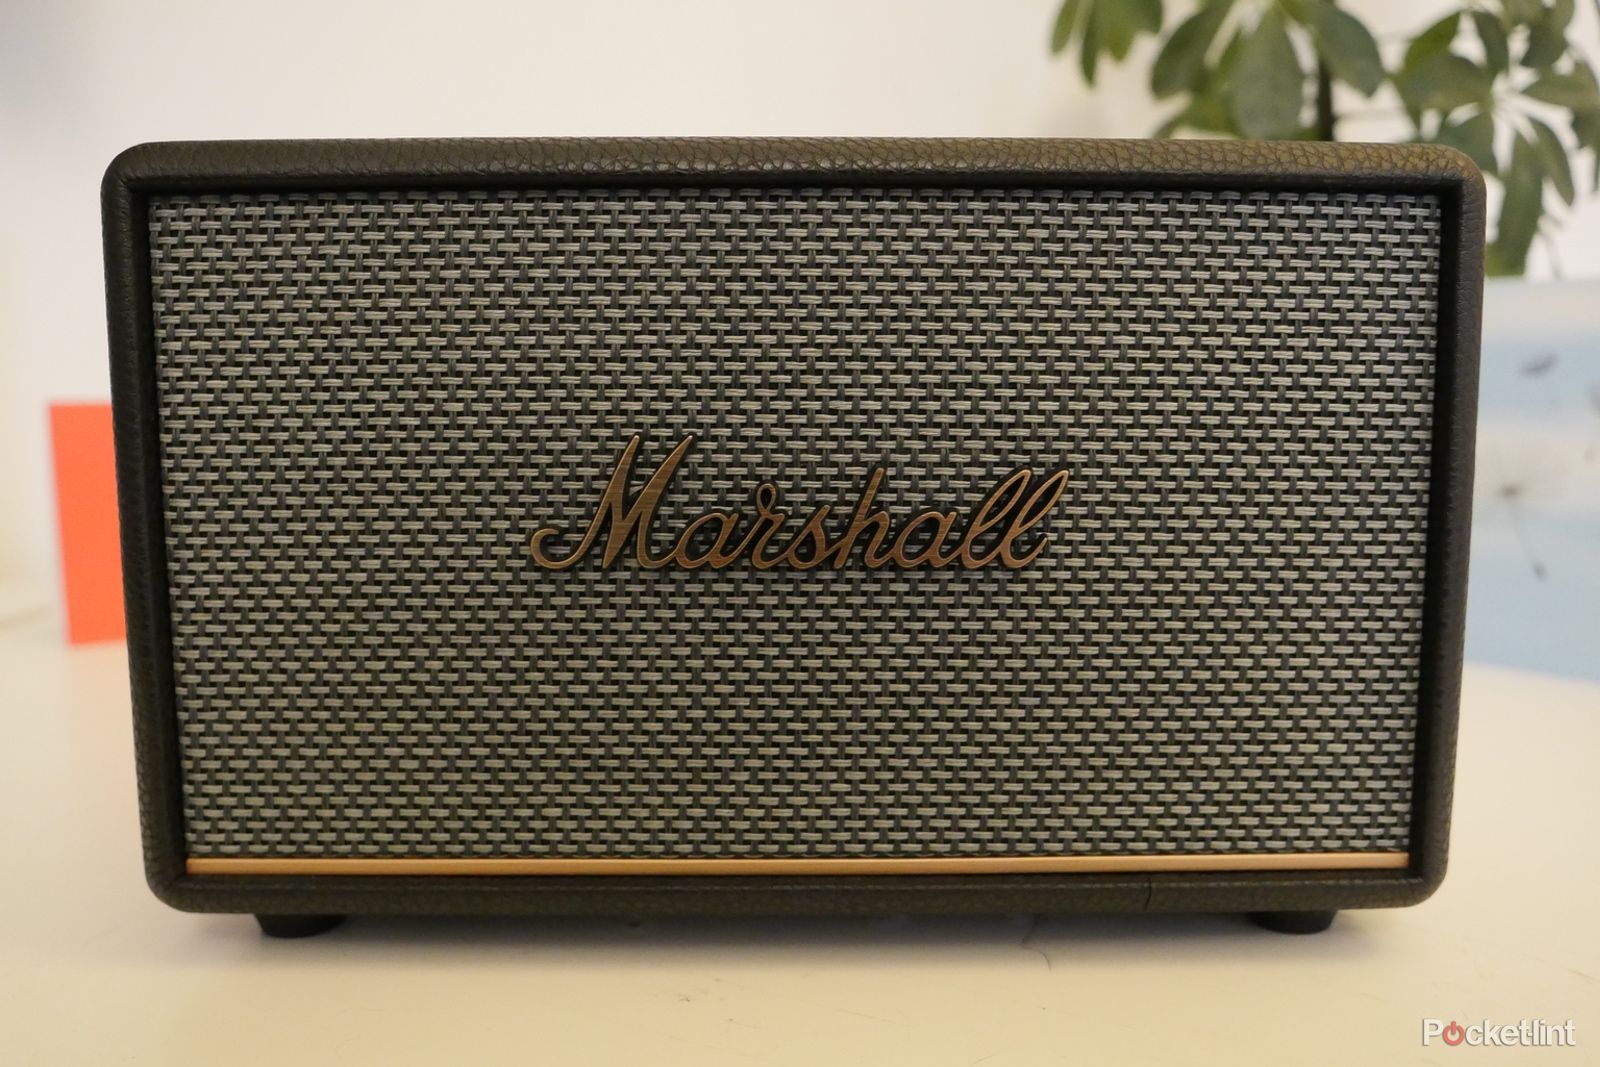 Marshall Acton III review: Classically musical